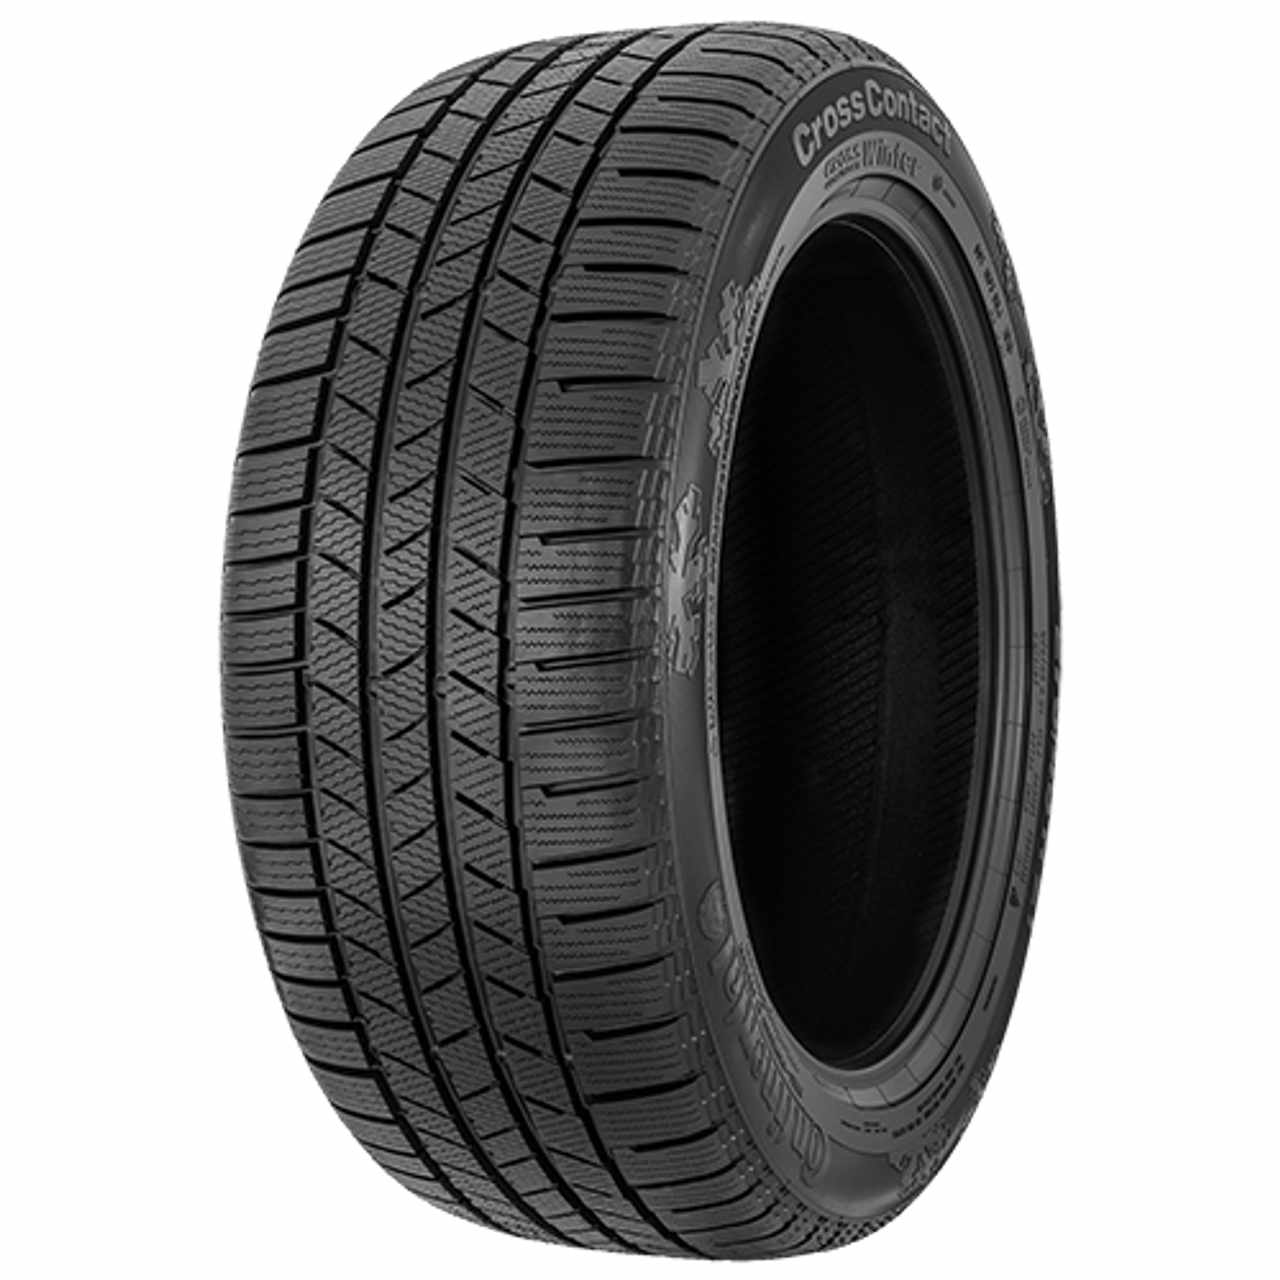 CONTINENTAL CONTICROSSCONTACT WINTER (MO) 235/60R17 102H ML